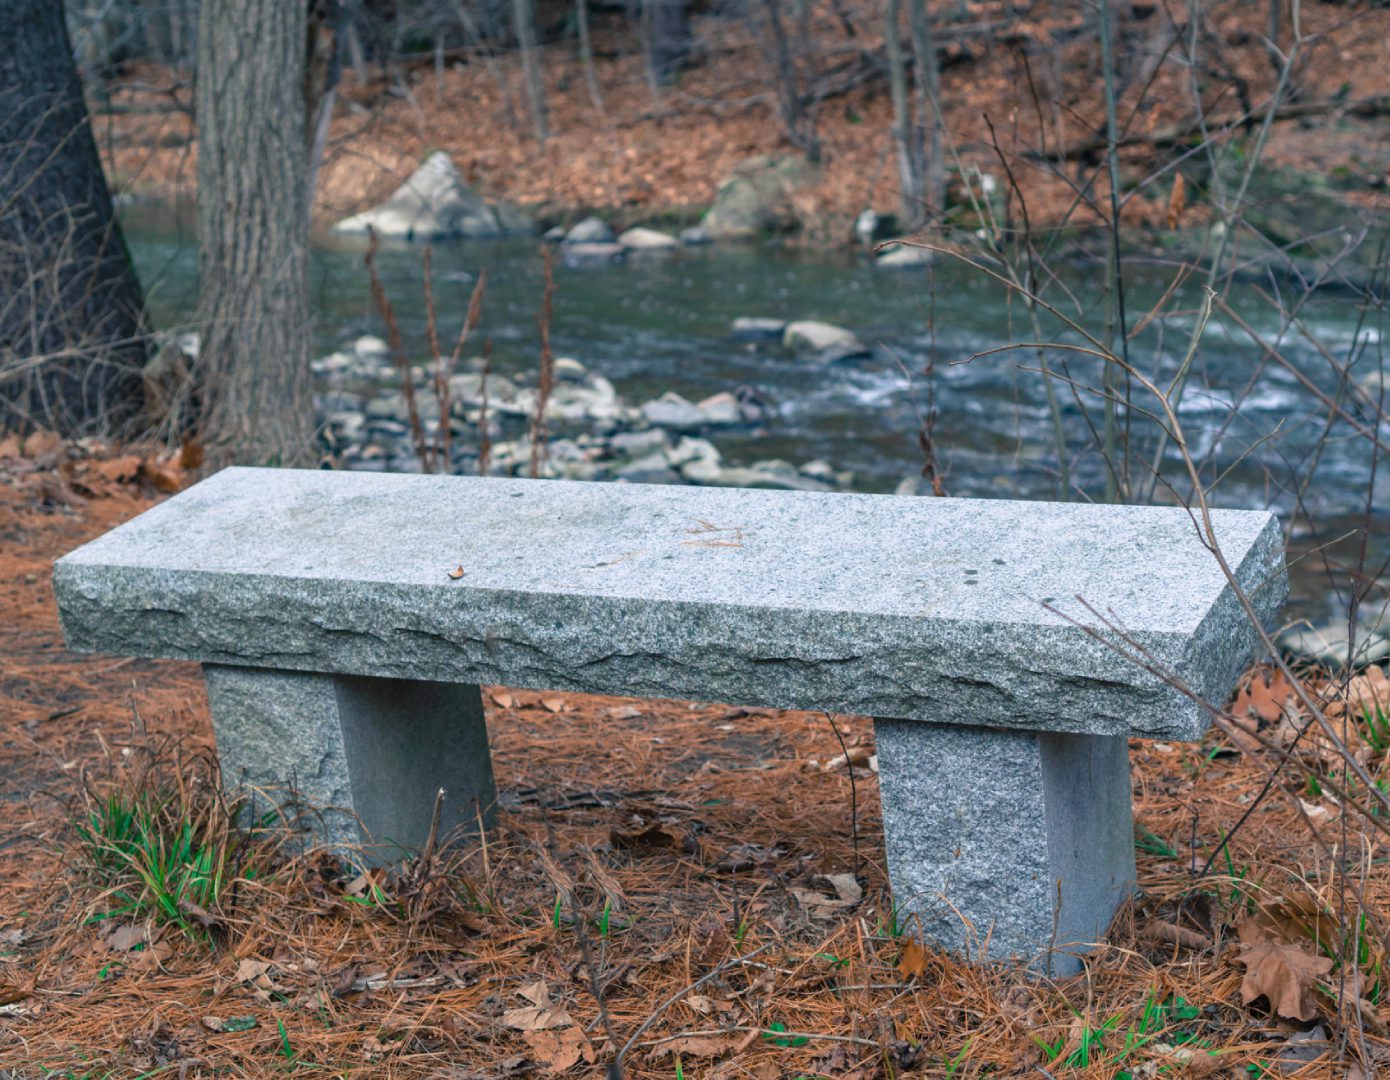 A stone bench in the woods near water.